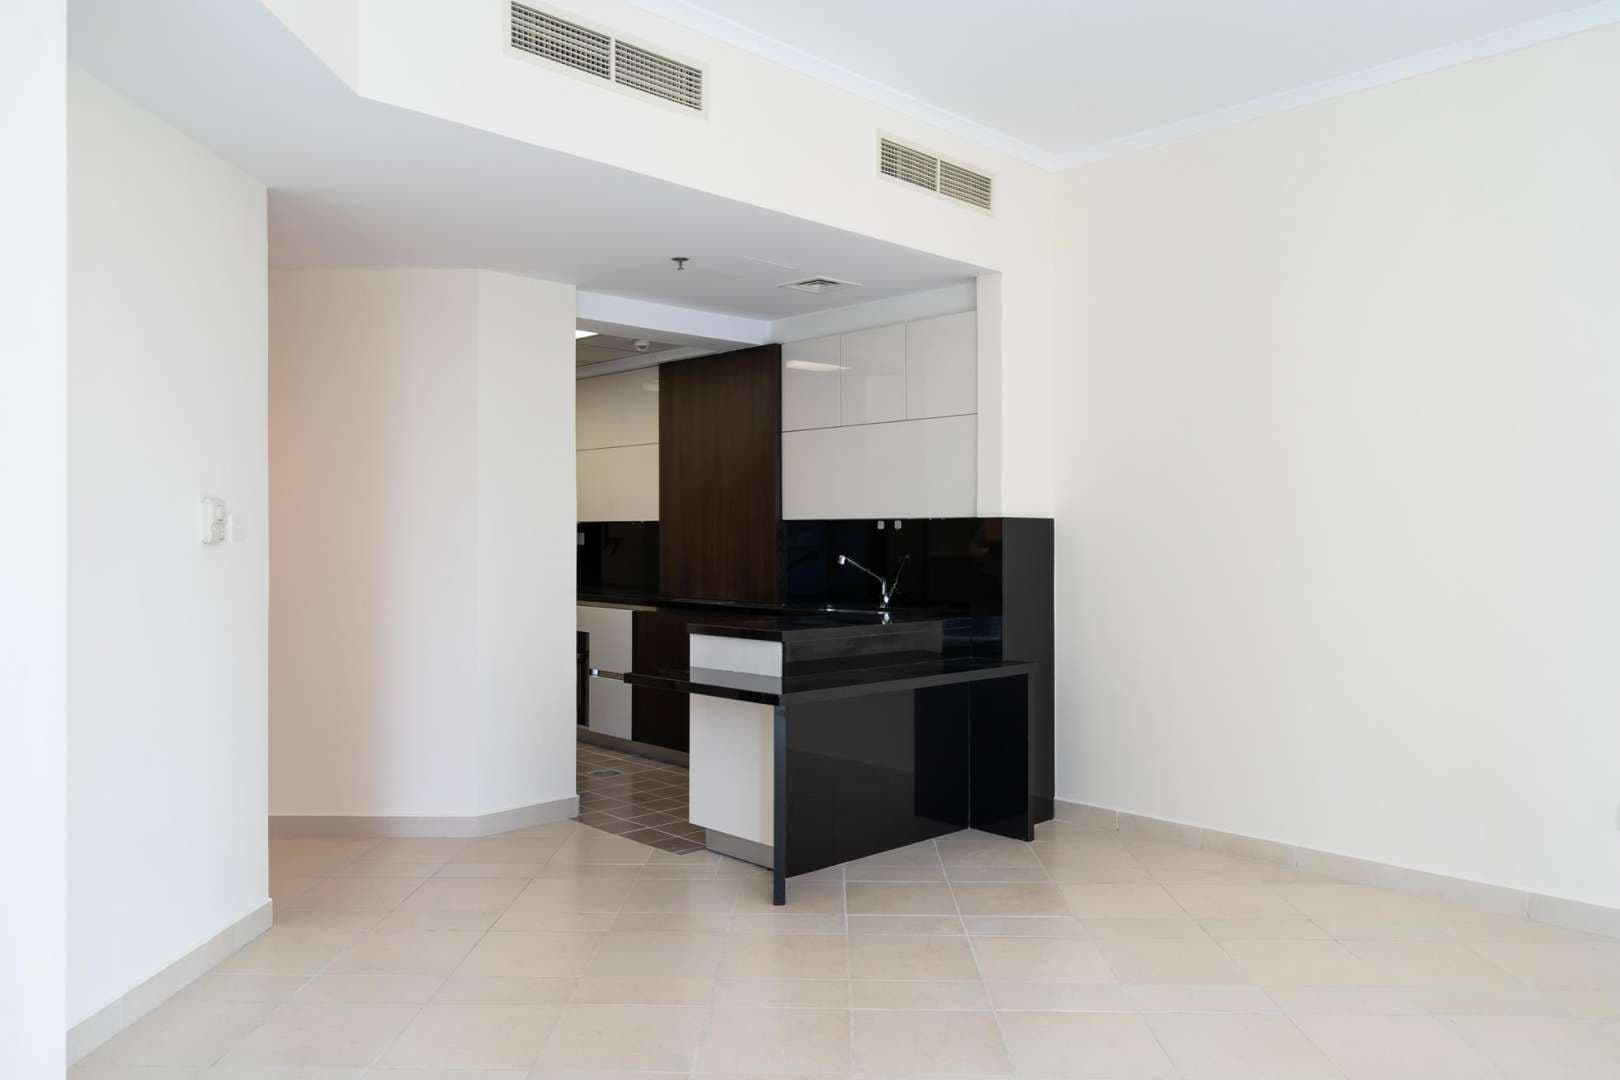 2 Bedroom Apartment For Rent The Torch Lp03389 25f1f207854d9000.jpg